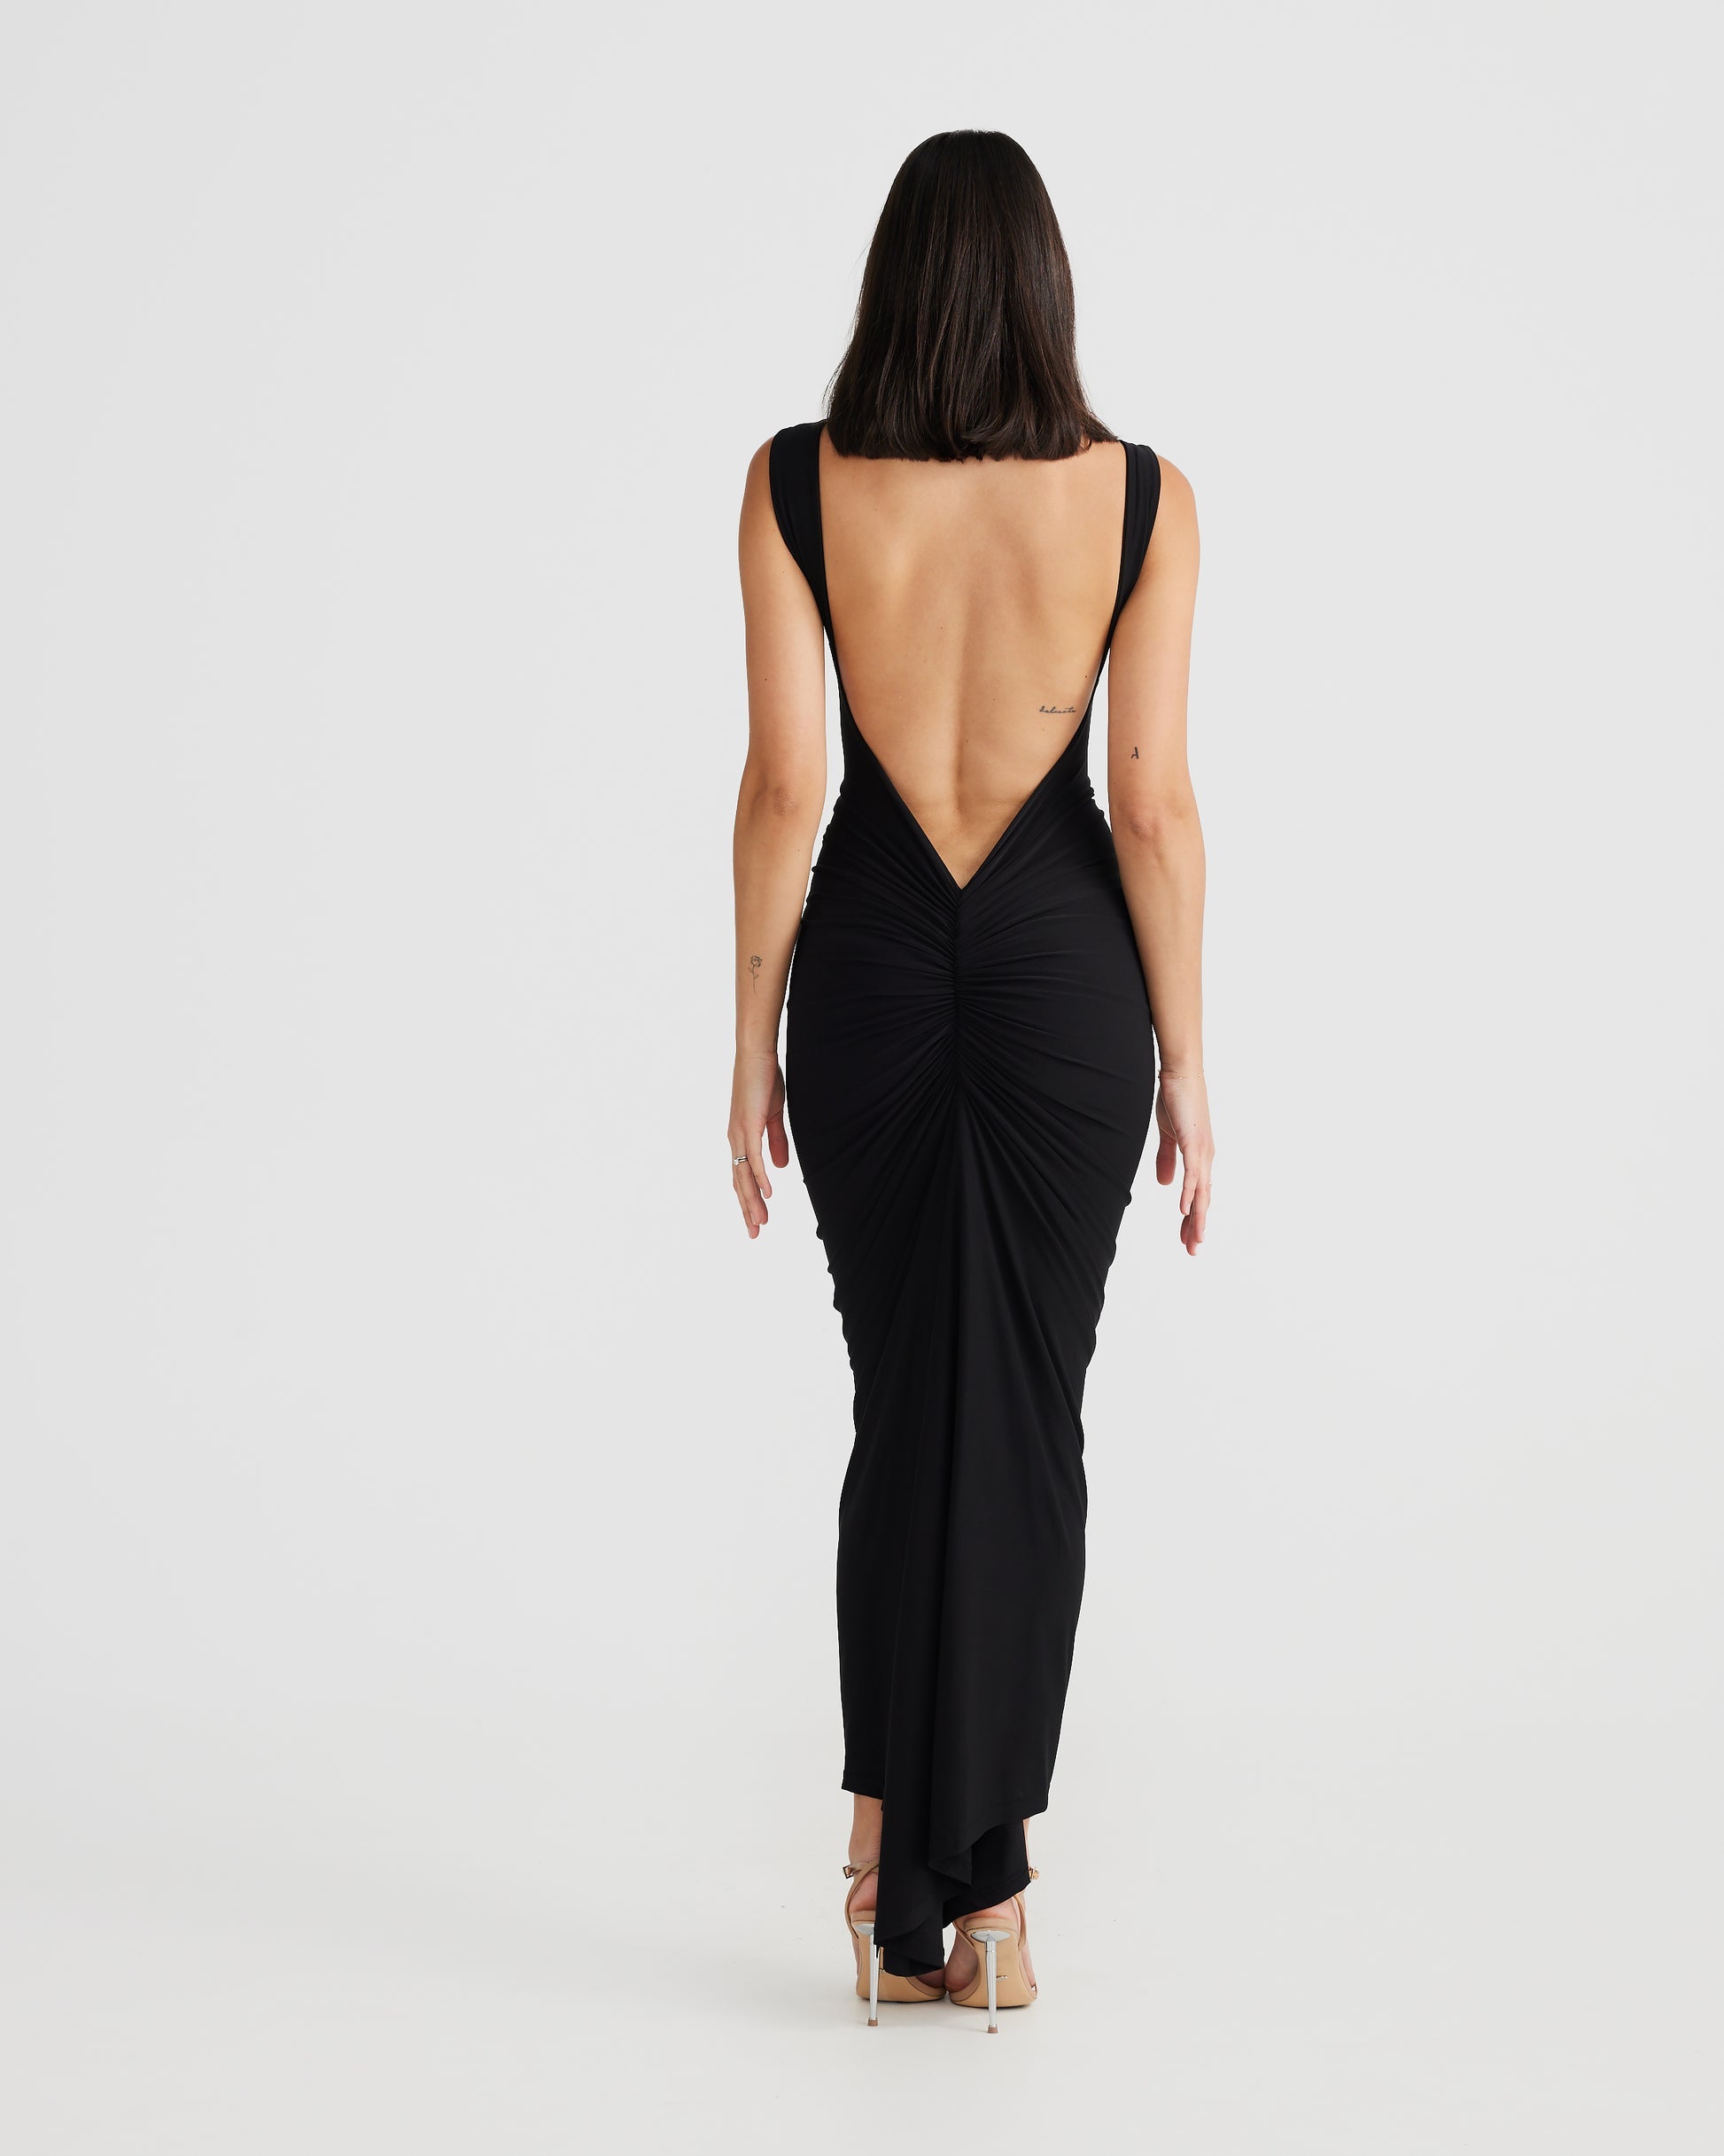 MÉLANI The Label SABIA Black Ruched Bum Backless Dress